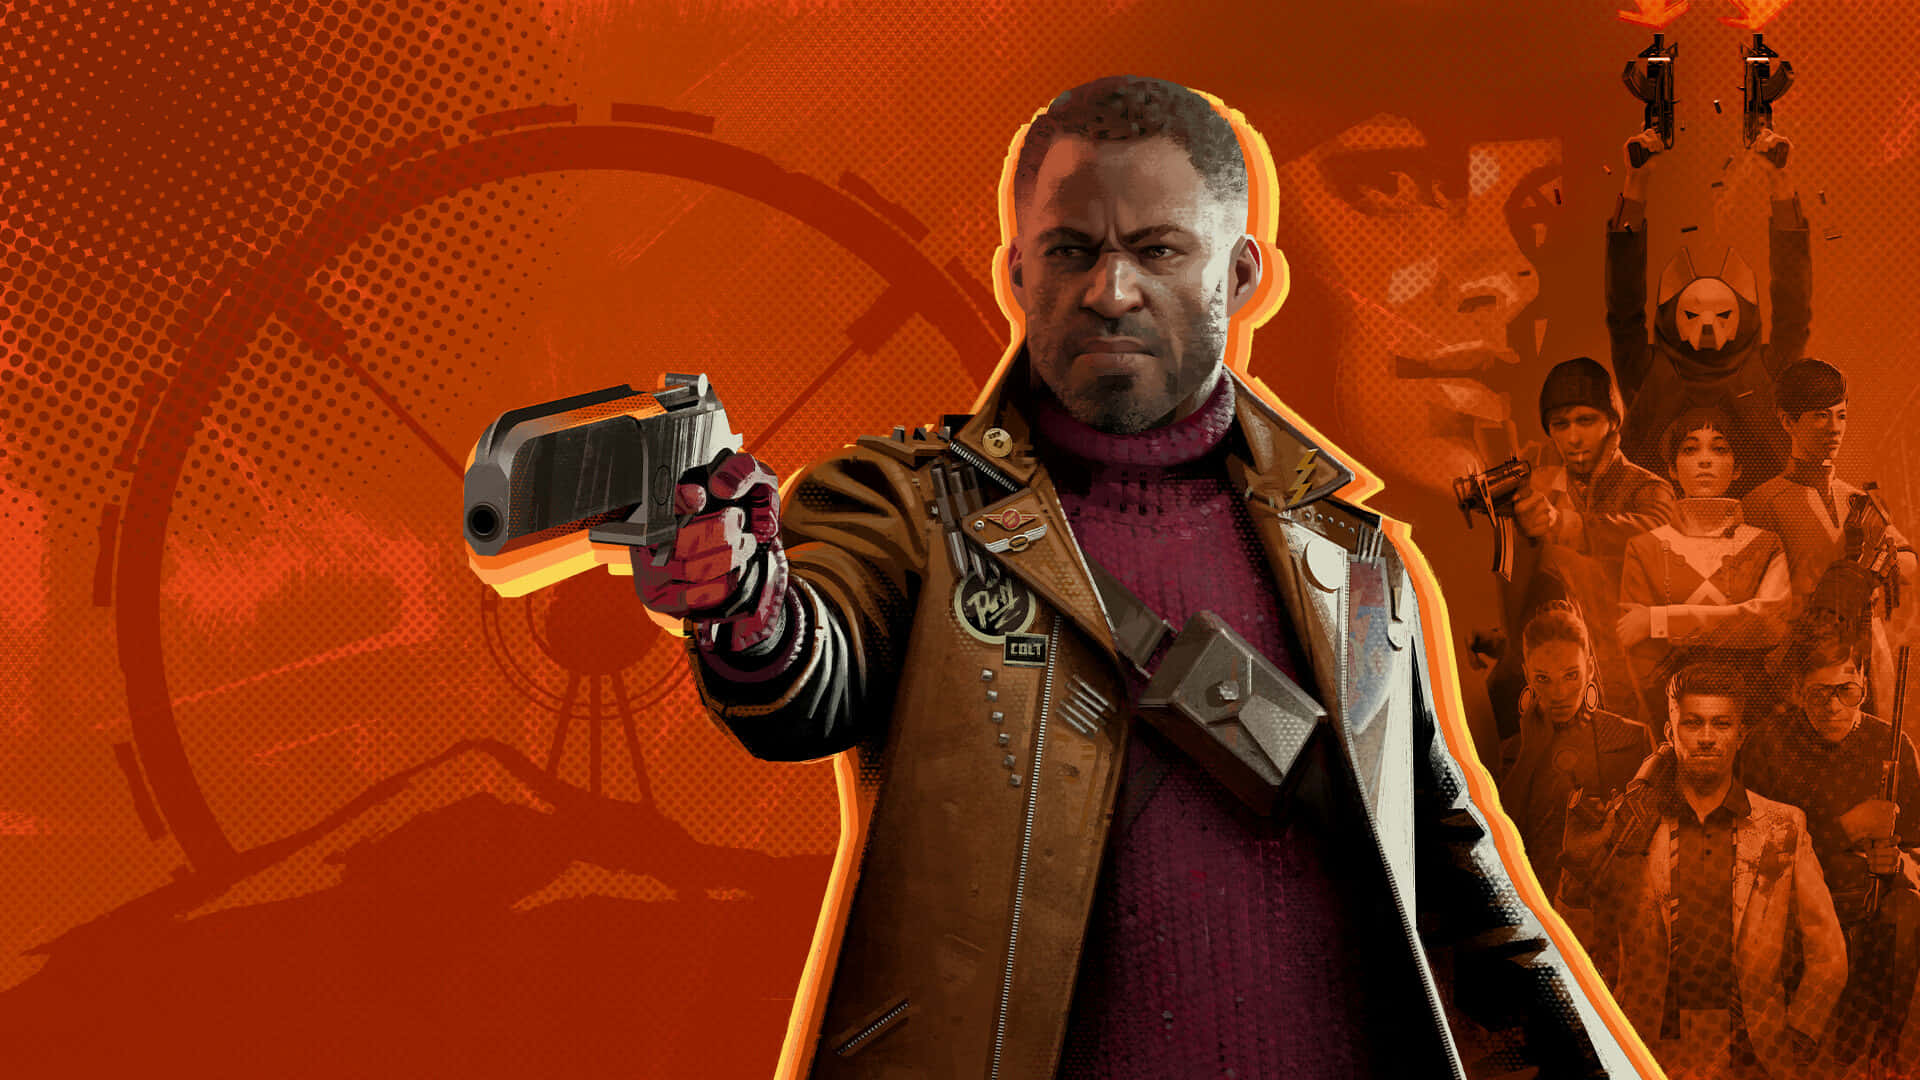 A Man Holding A Gun In Front Of An Orange Background